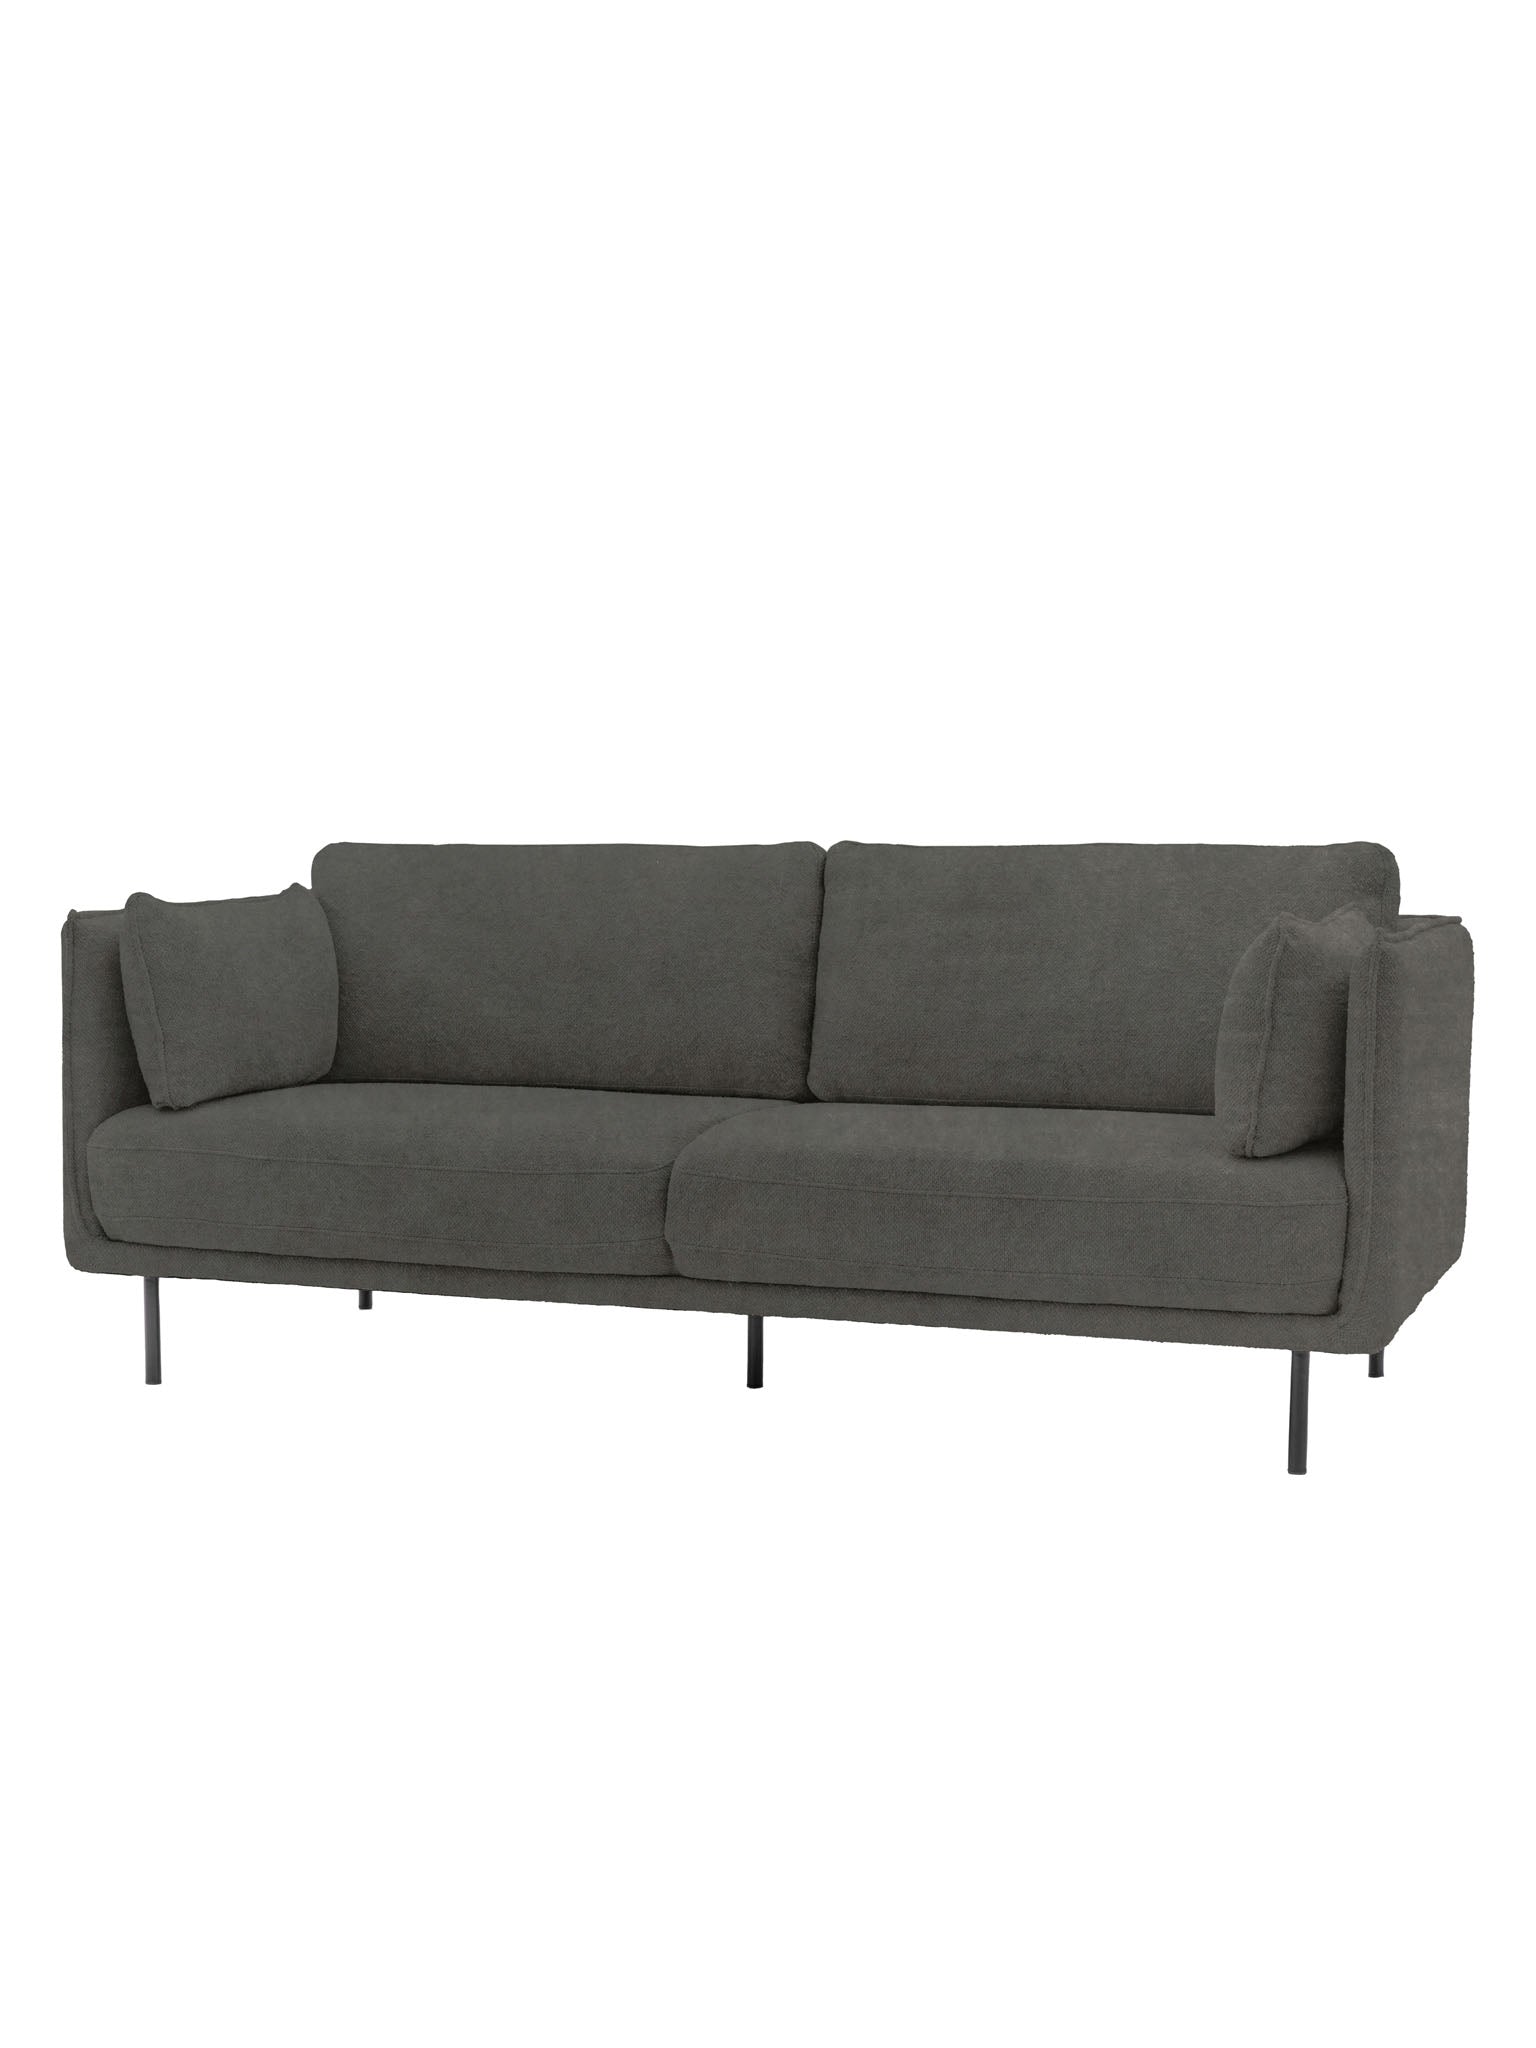 3 seater sofa in Truffle with black legs